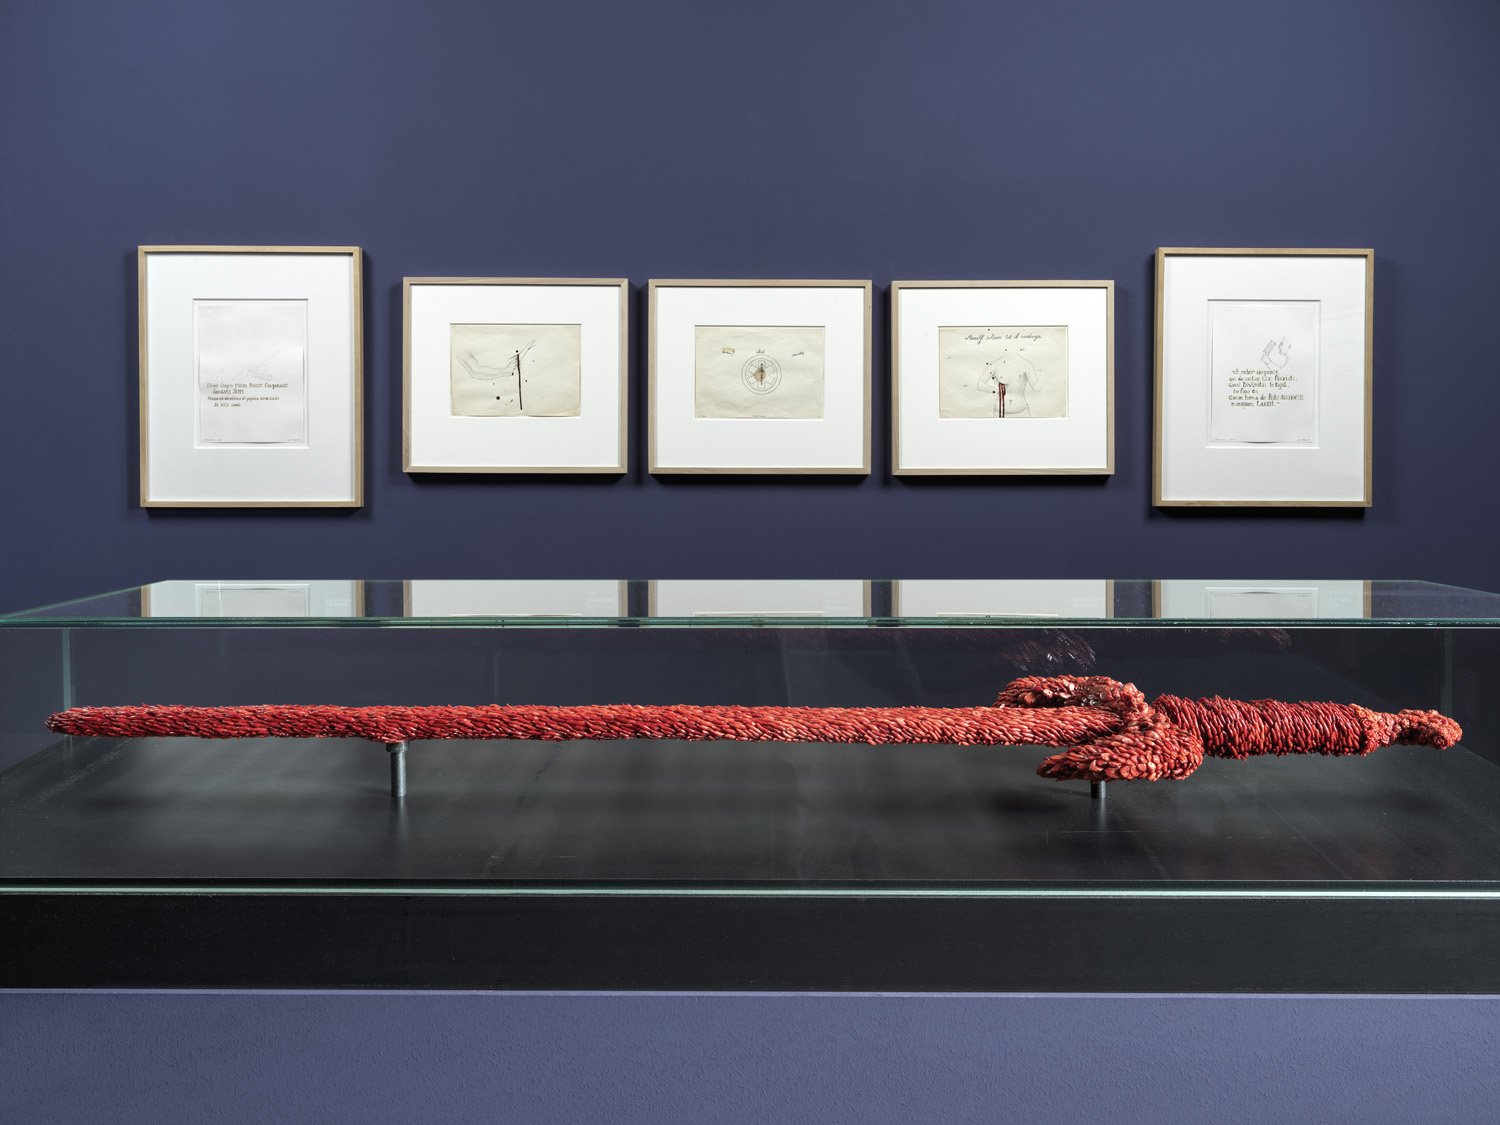 12. Jan Fabre, Golden and Coral Sculptures, Blood Drawings, 30 March - 15 September 2019, installation view at Museo e Real Bosco di Capodimonte, Naples.jpg